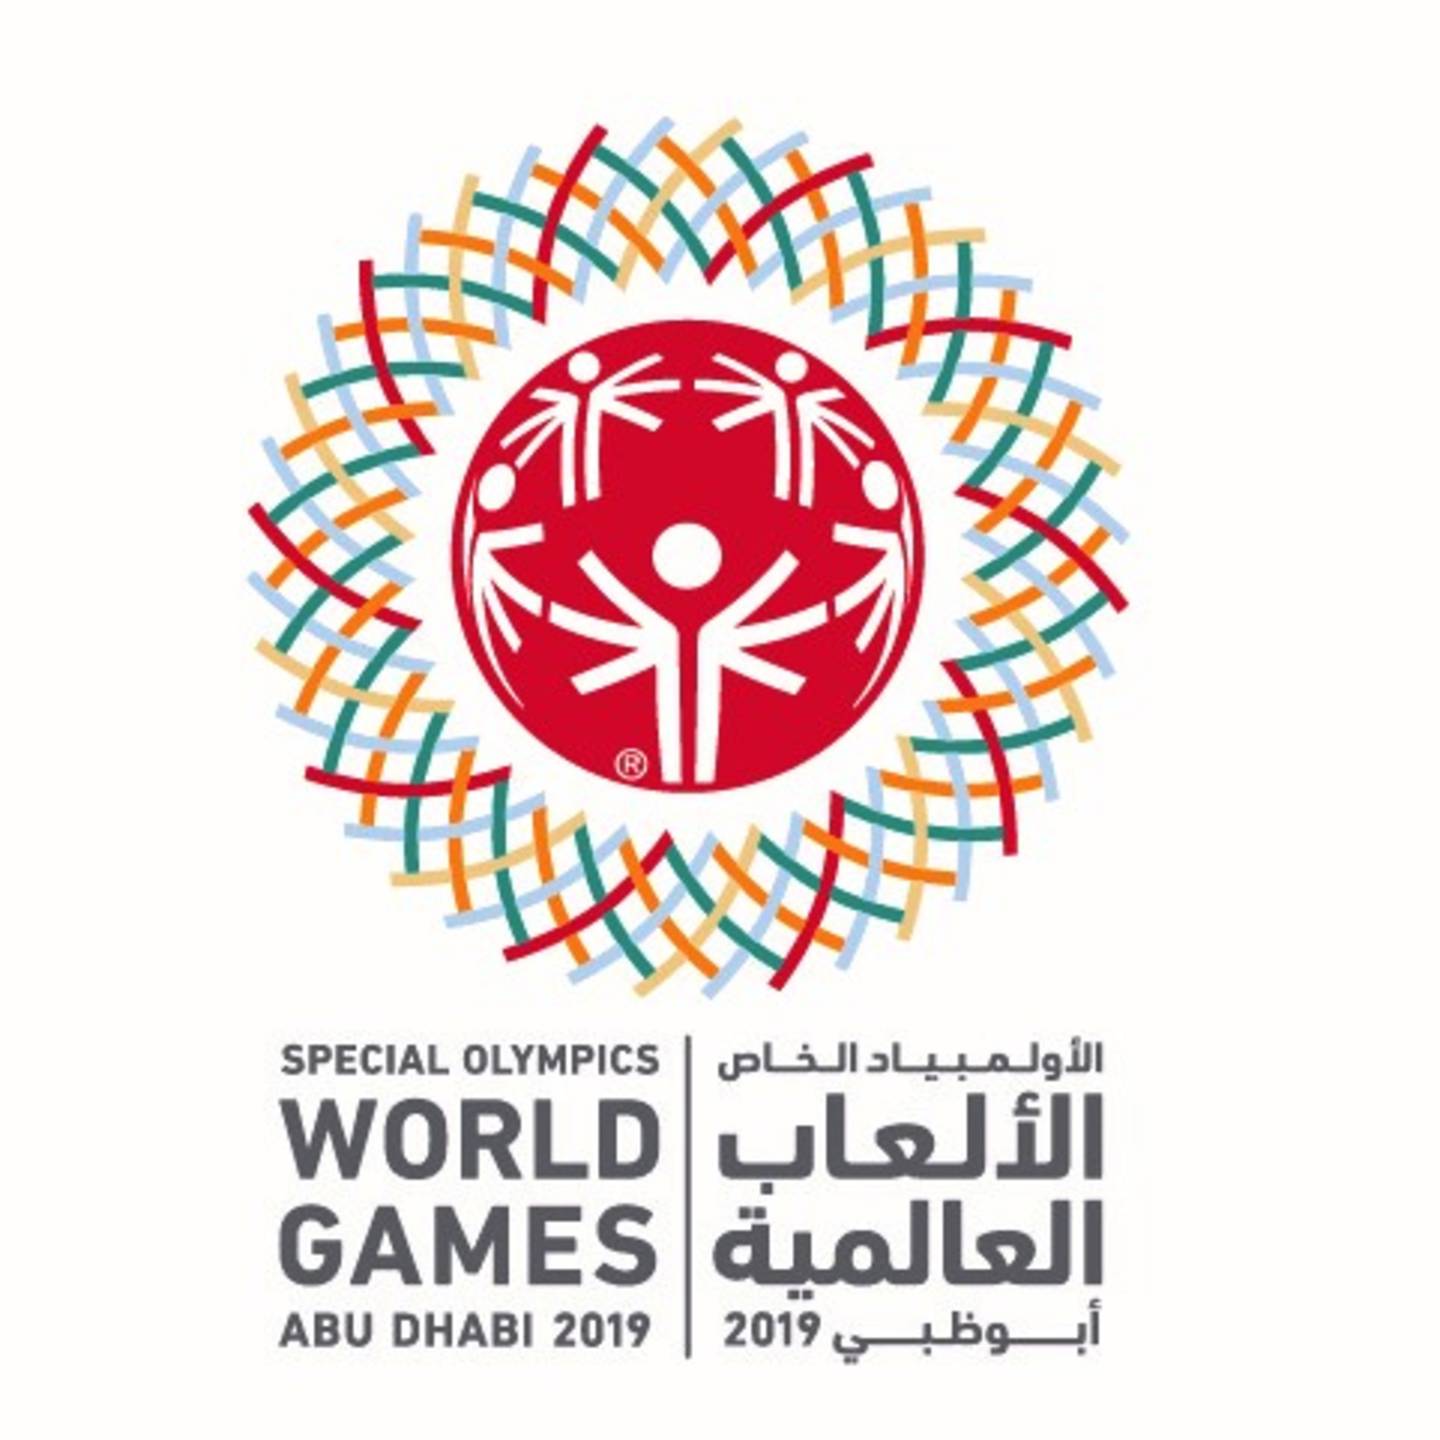 Special Olympics World Games 2019 logo